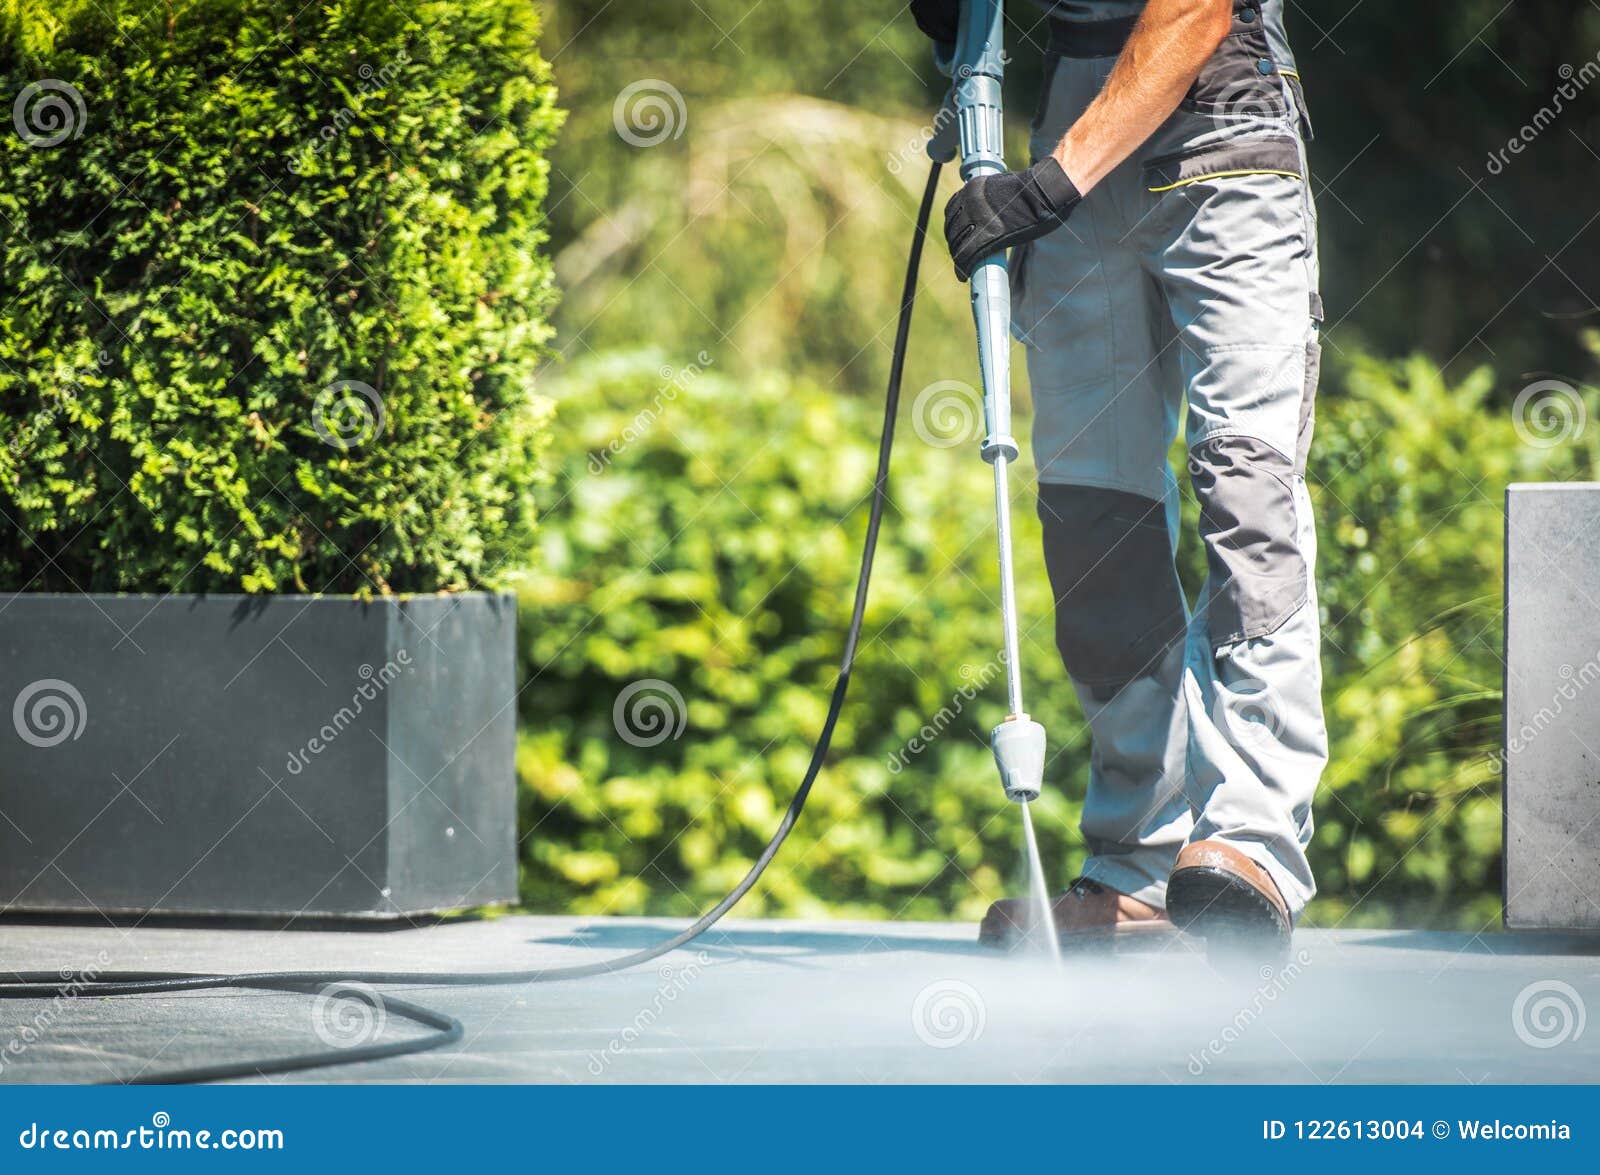 patio pressure cleaning